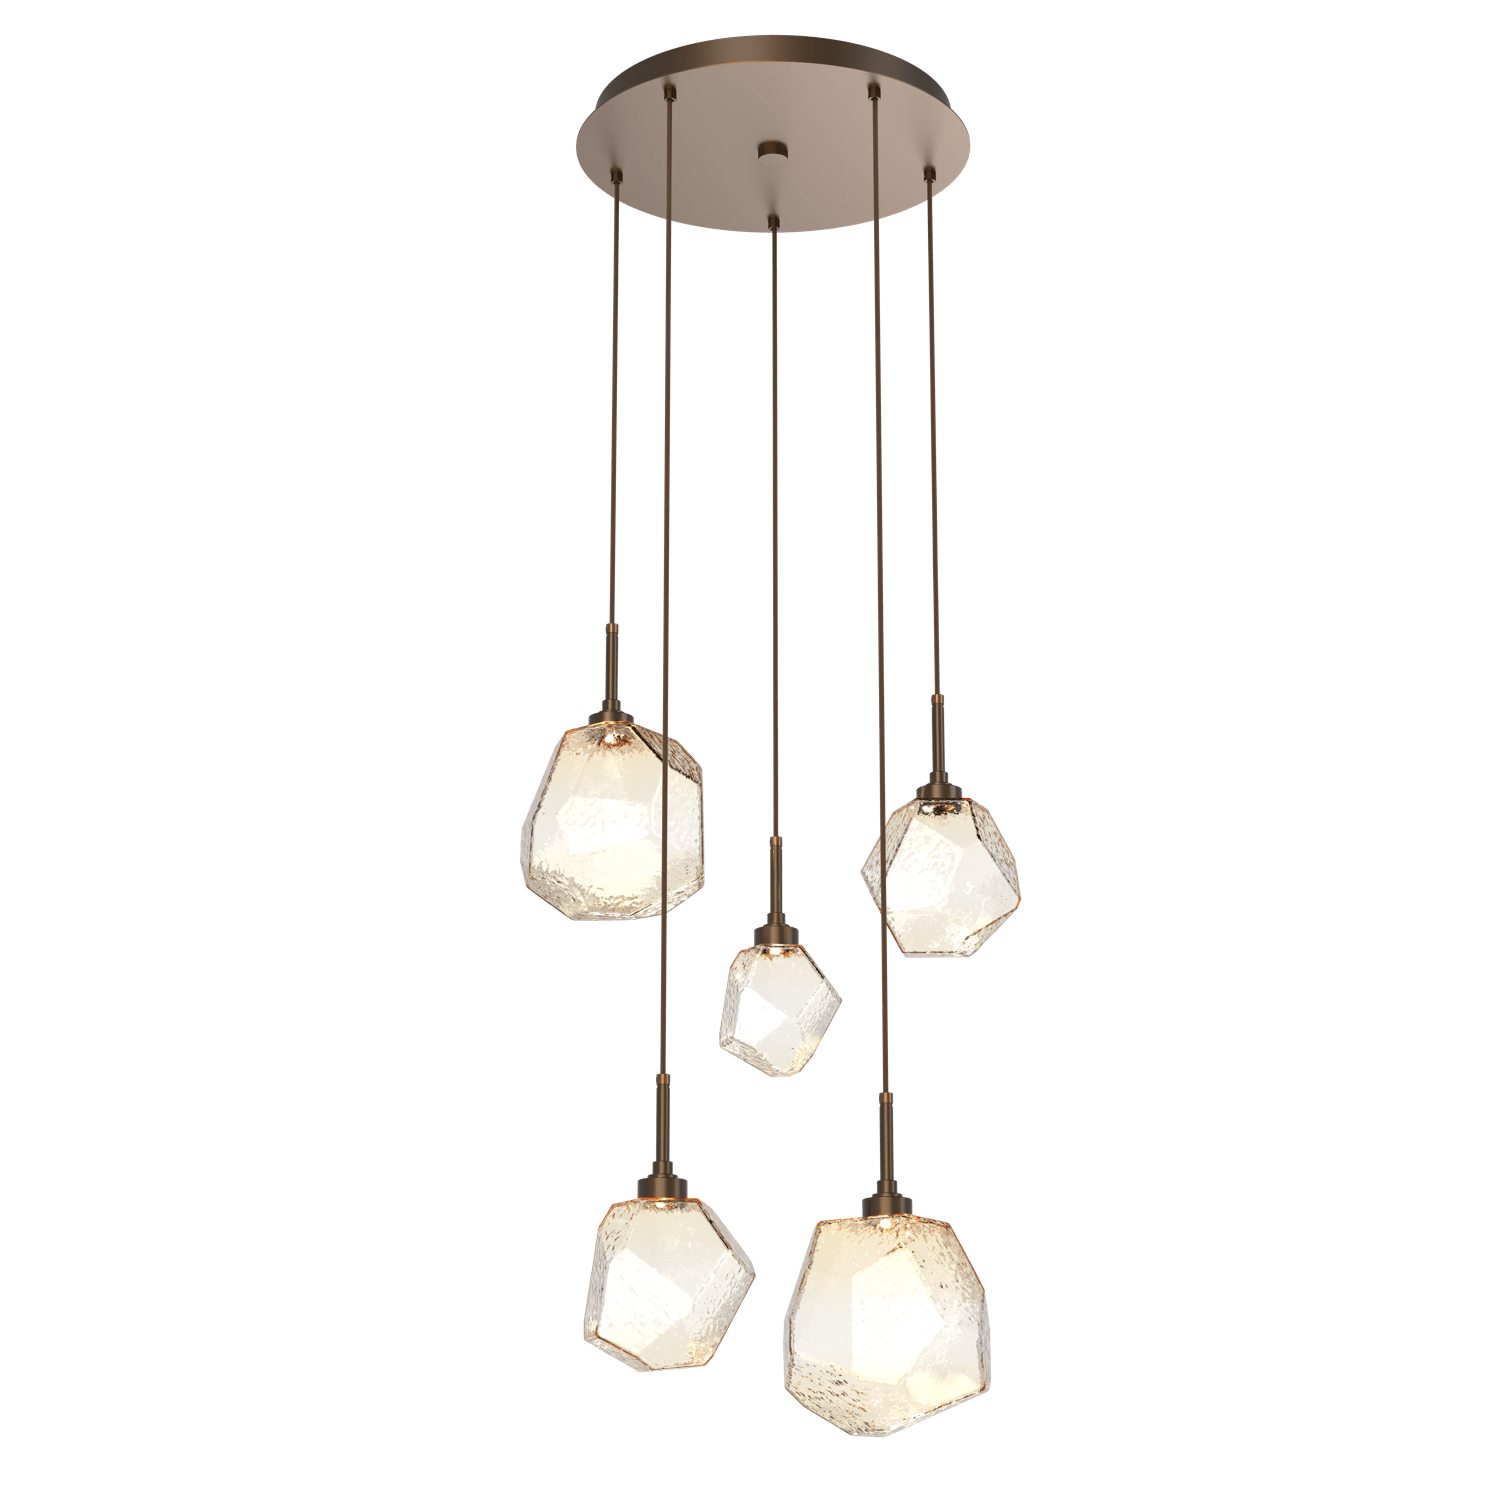 CHB0039-05-FB-A-Hammerton-Studio-Gem-5-light-round-pendant-chandelier-with-flat-bronze-finish-and-amber-blown-glass-shades-and-LED-lamping